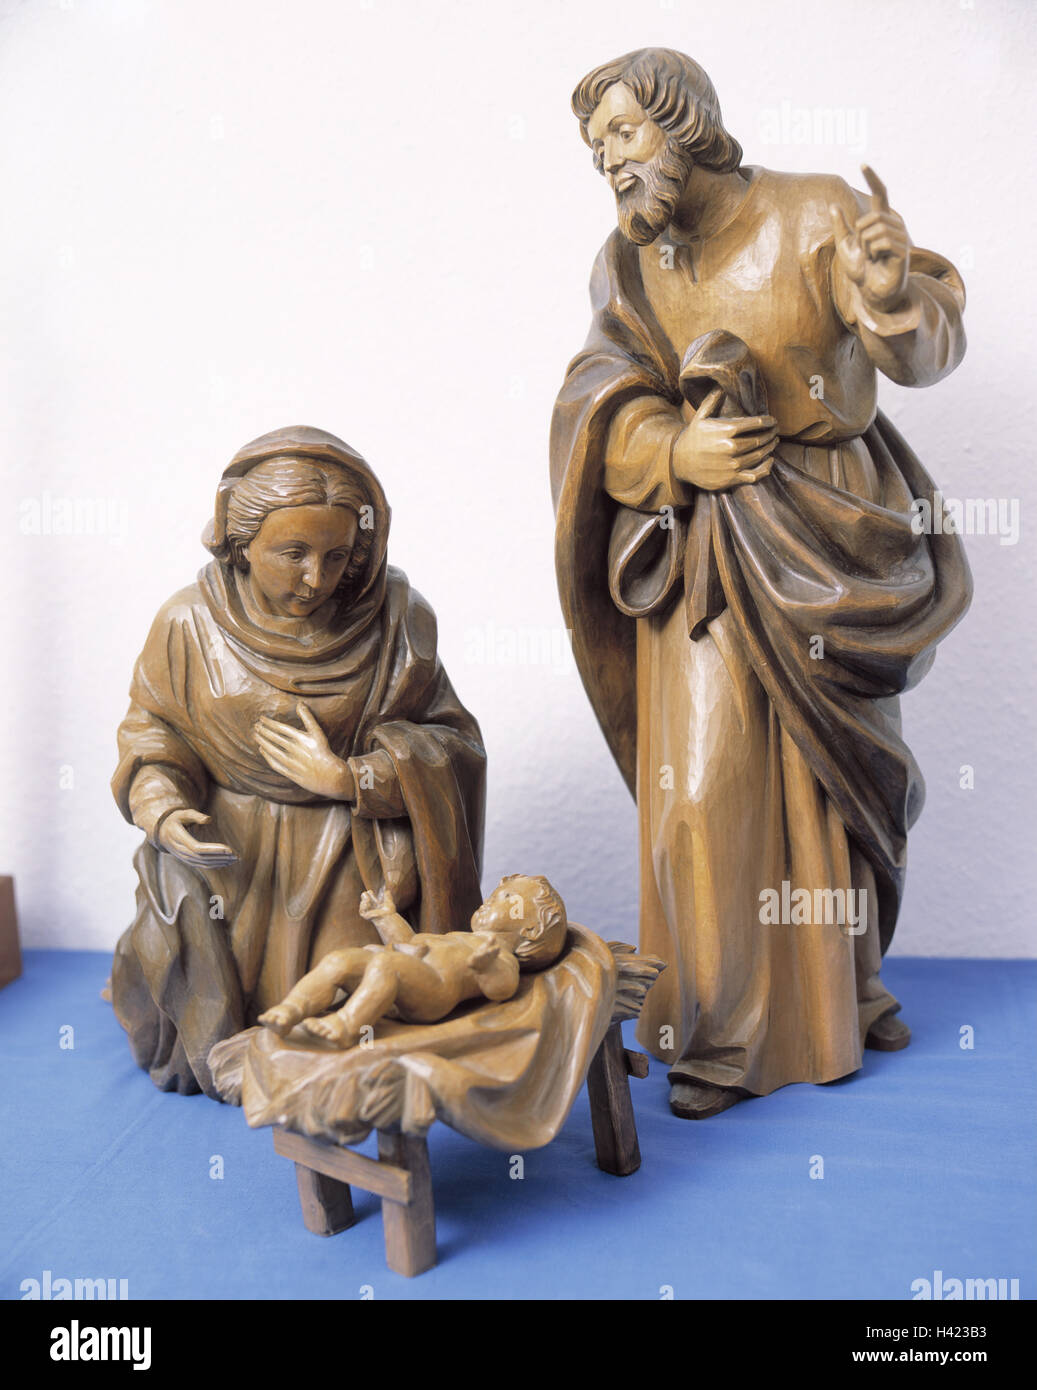 Christmas, nativity figurines, holy family, Germany, upper bunting's region, creche, manger, traditions, religion, child Jesus, Wooden characters, characters, woodwork, pickled, material recording, Still life Stock Photo